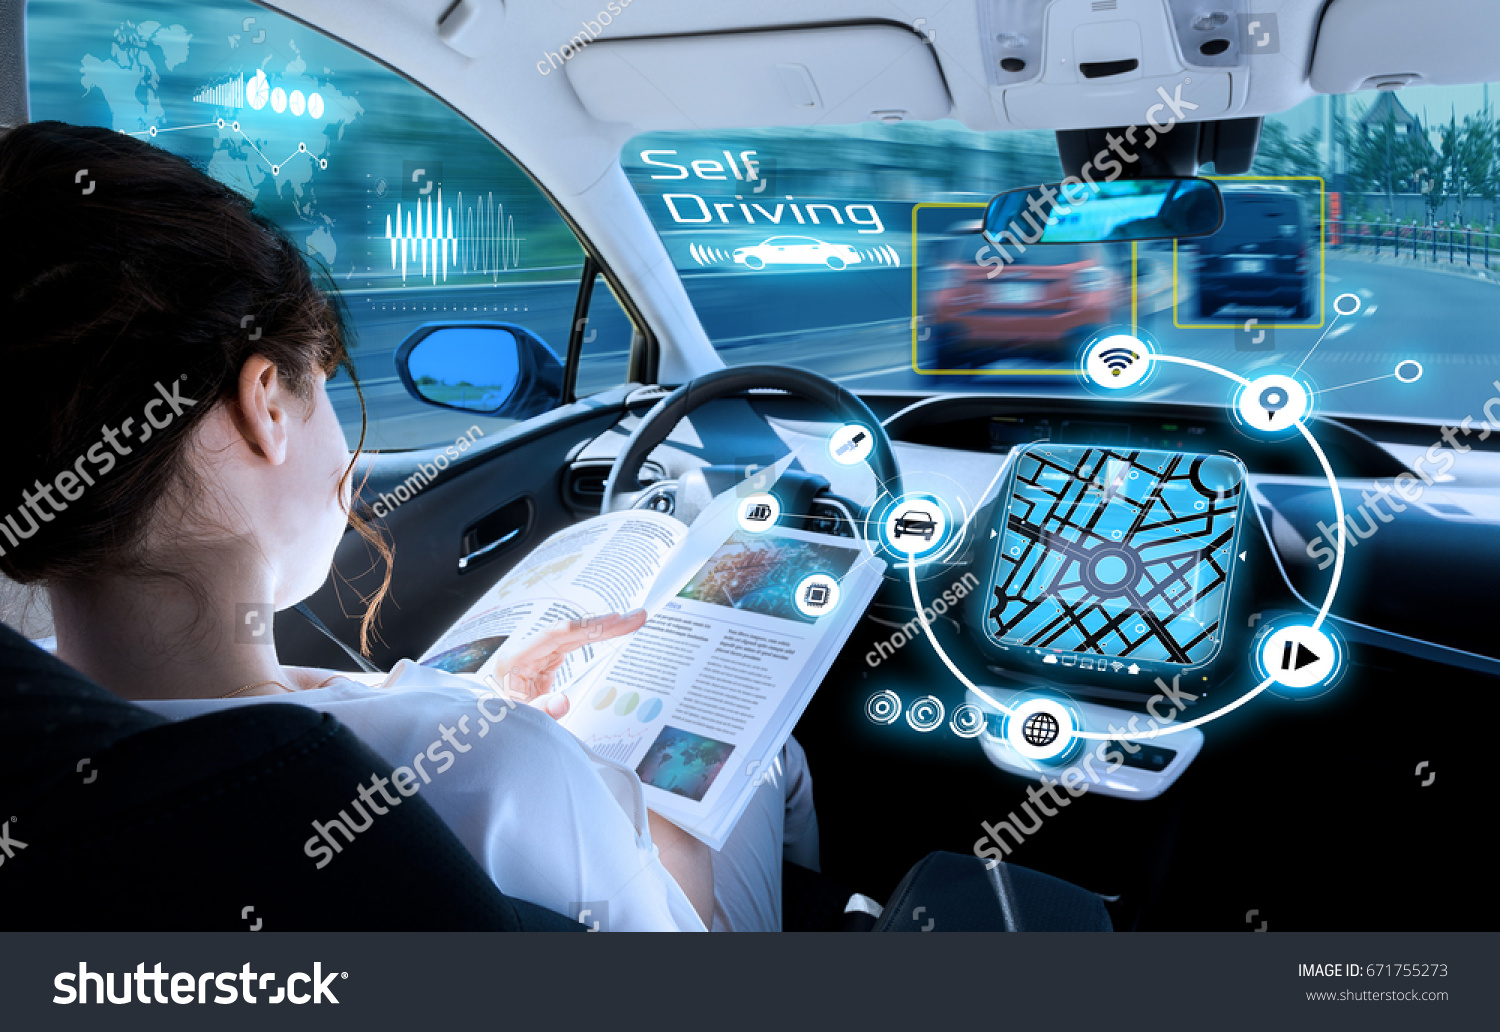 young woman reading a book in a autonomous car. driverless car. self driving vehicle. heads up display. automotive technology.
 #671755273